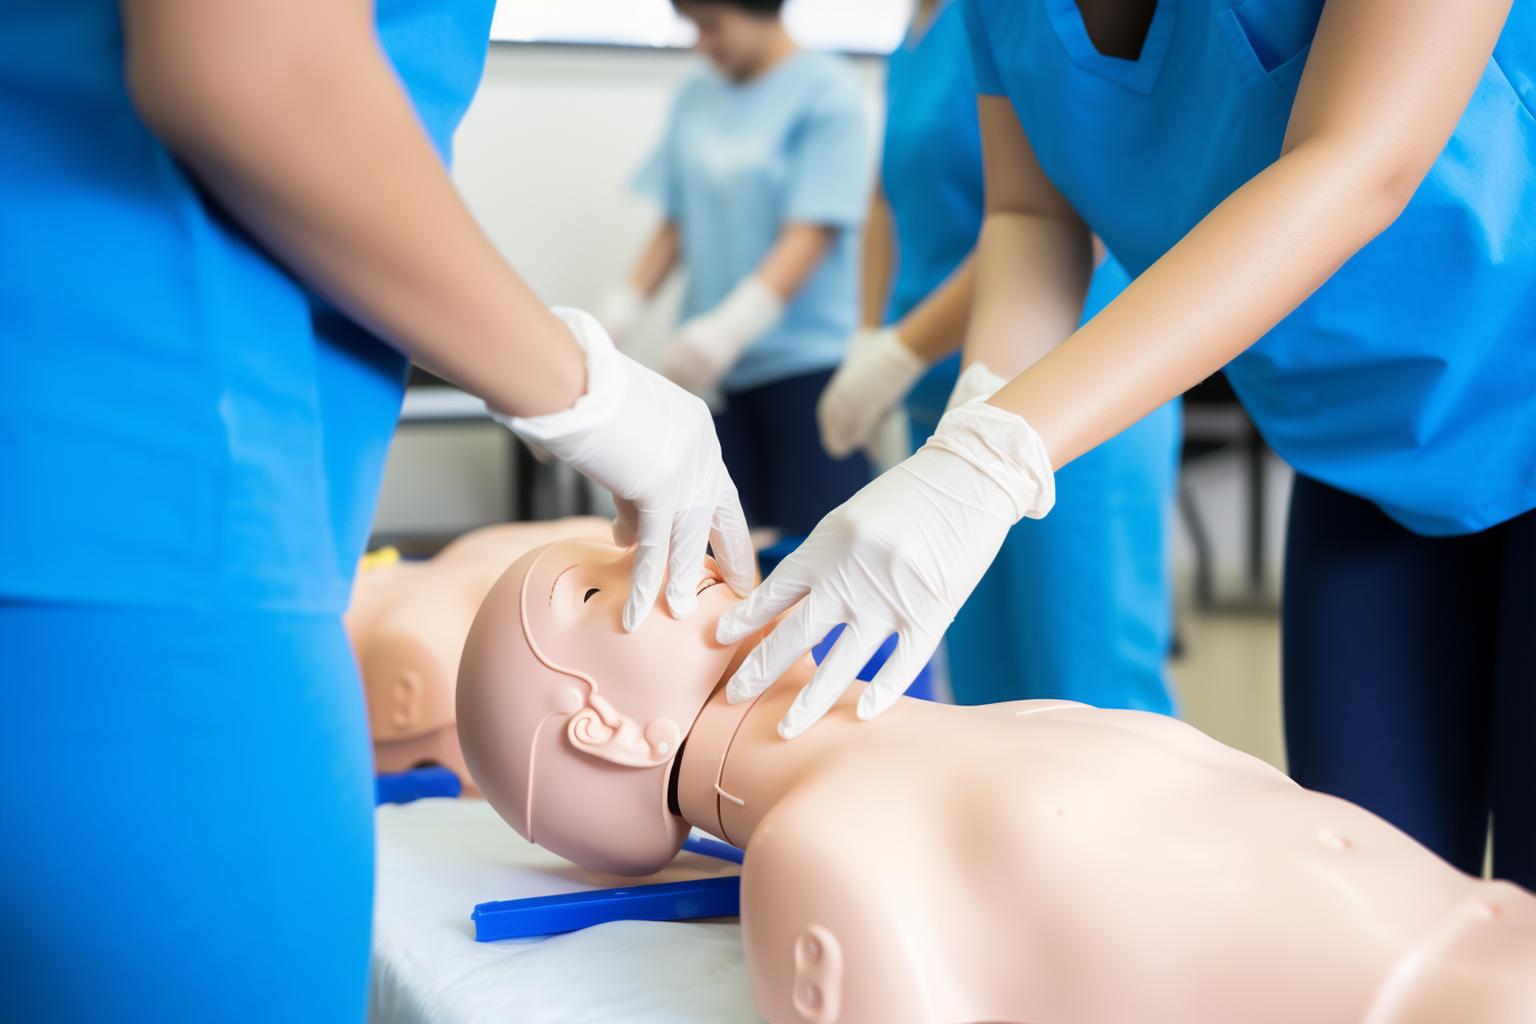 Simulation in competency-based nurse practitioner education